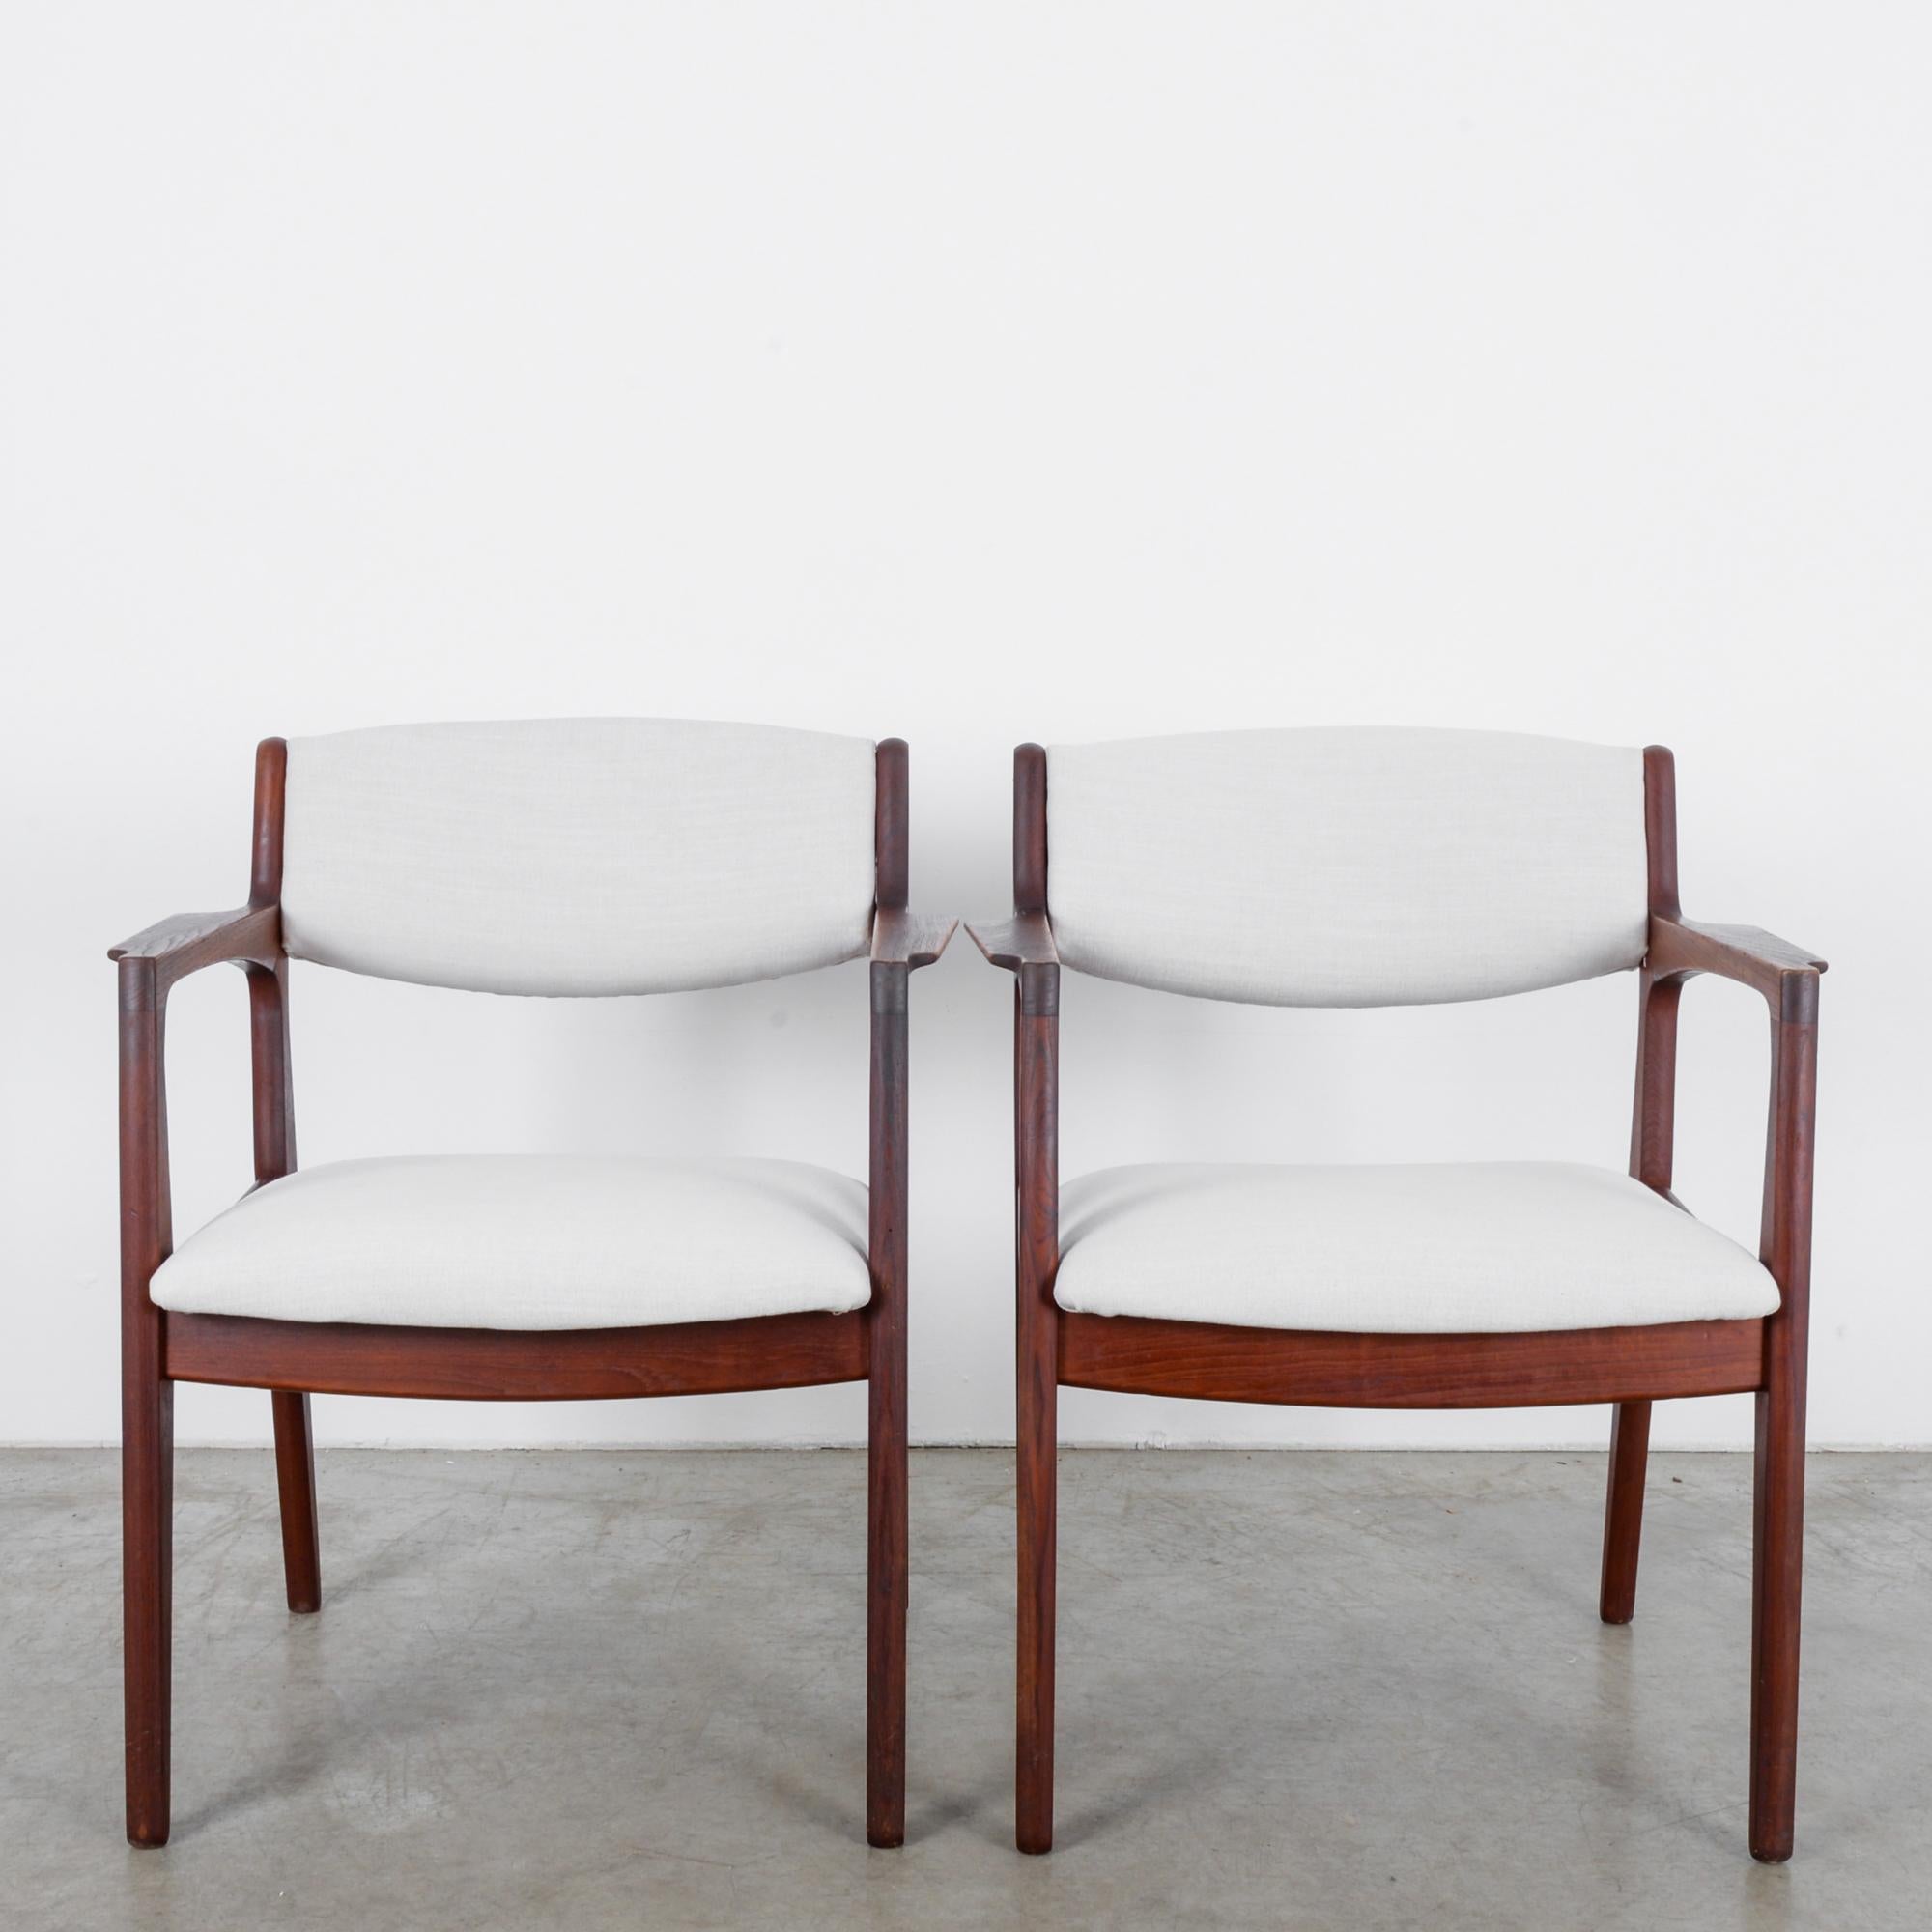 This pair of teak armchairs was made by Ørum Møbler in Denmark, circa 1960 and offer both comfort and style. The subtle curves in the tapered legs and armrests give these chairs an air of refinement. Ivory white upholstered seats and backs highlight